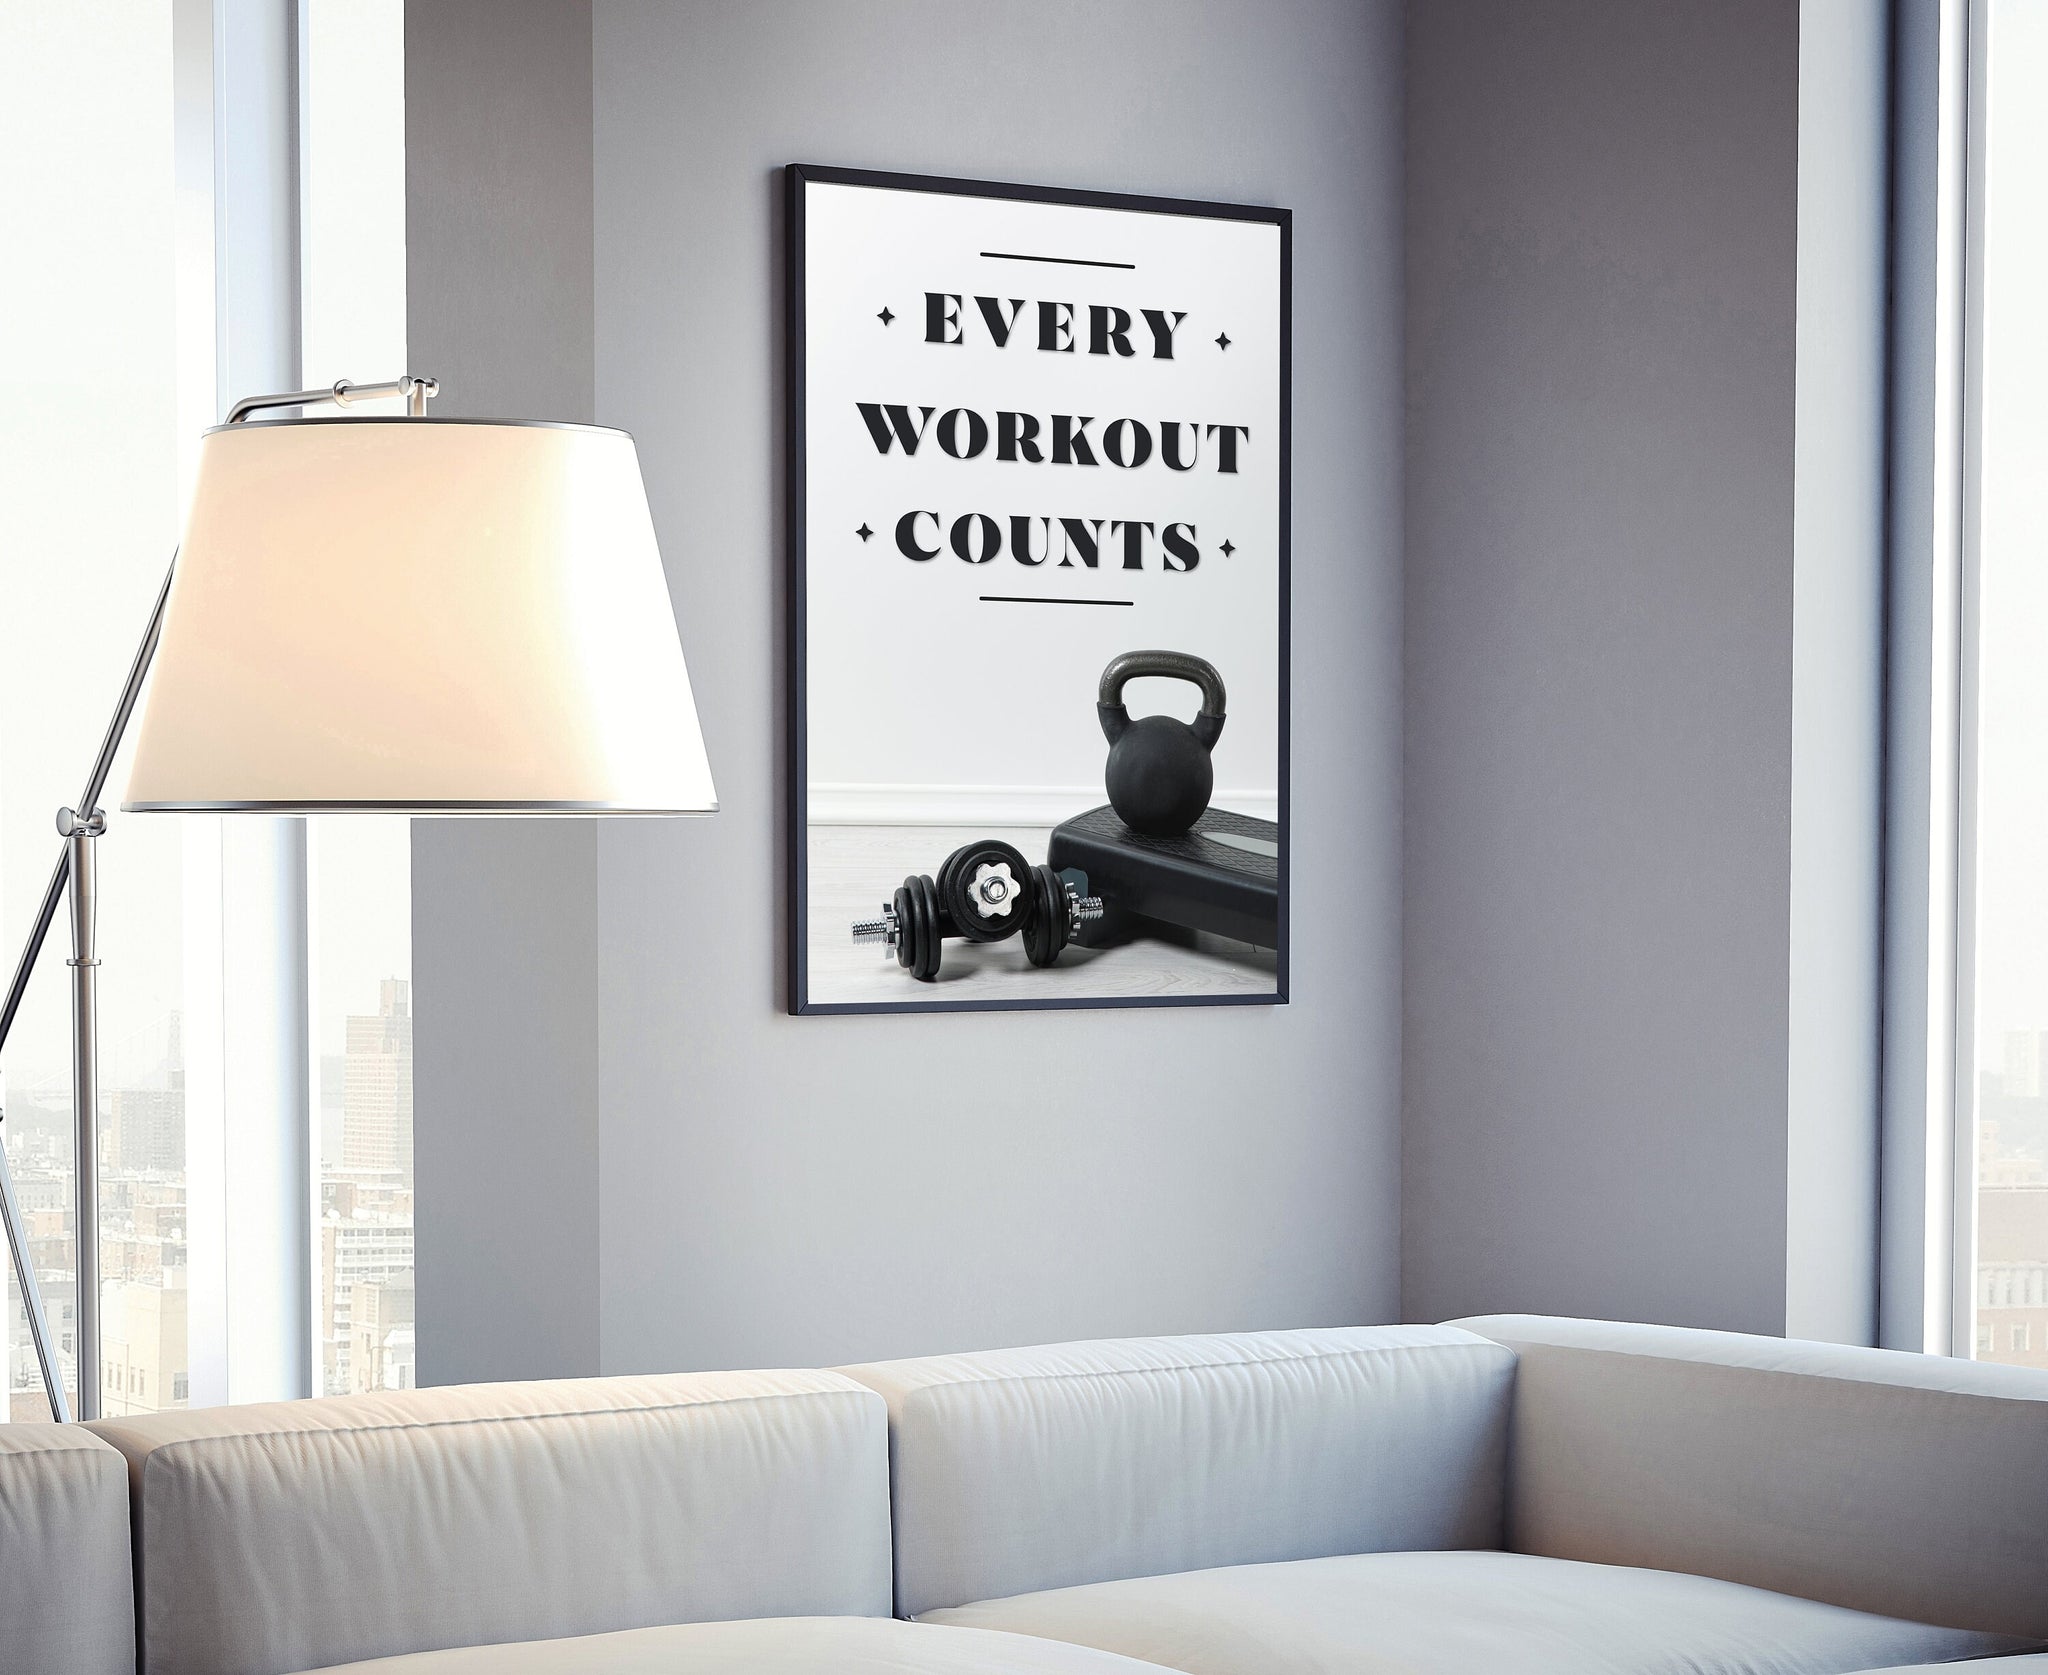 Gym wall art, gym poster print, gym decoration, fitness room wall art, workout quotes, home gym poster, inspired poster, motivational poster